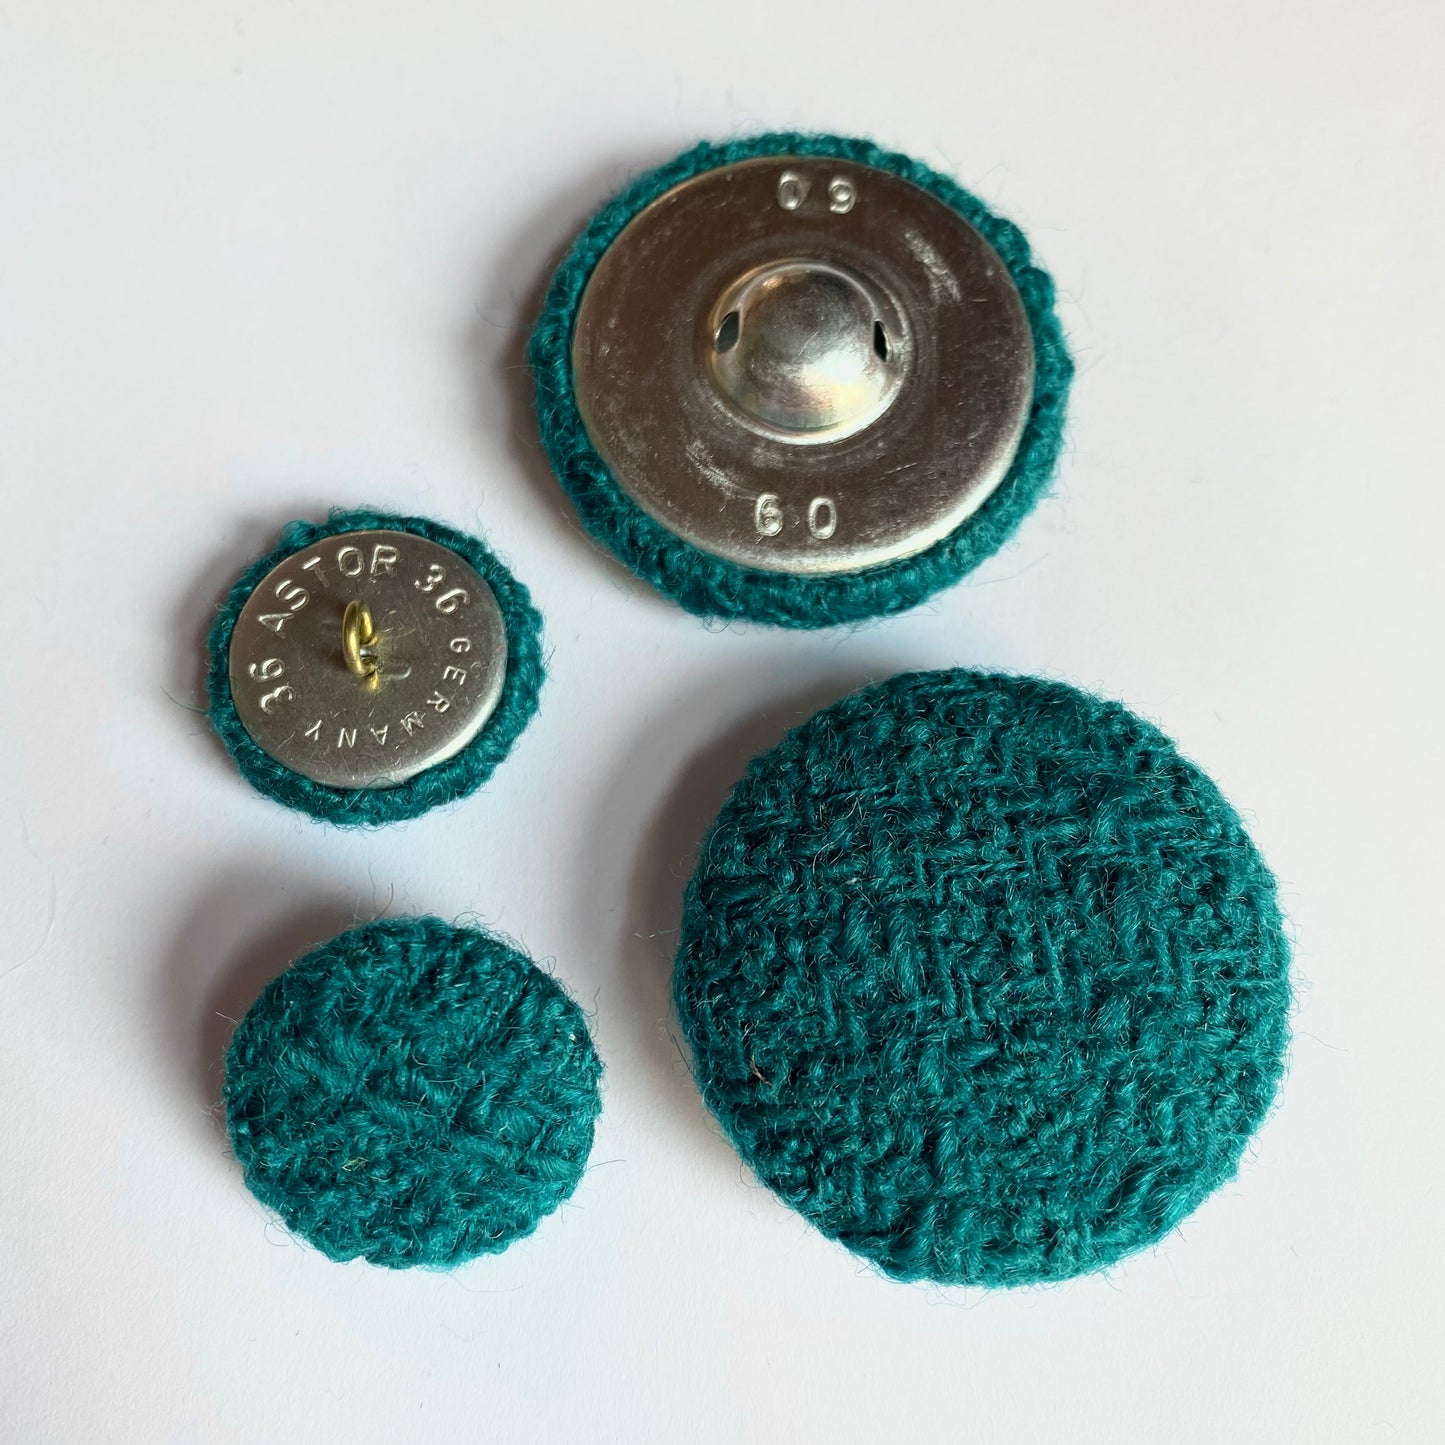 Fabric-covered button 24-40 mm